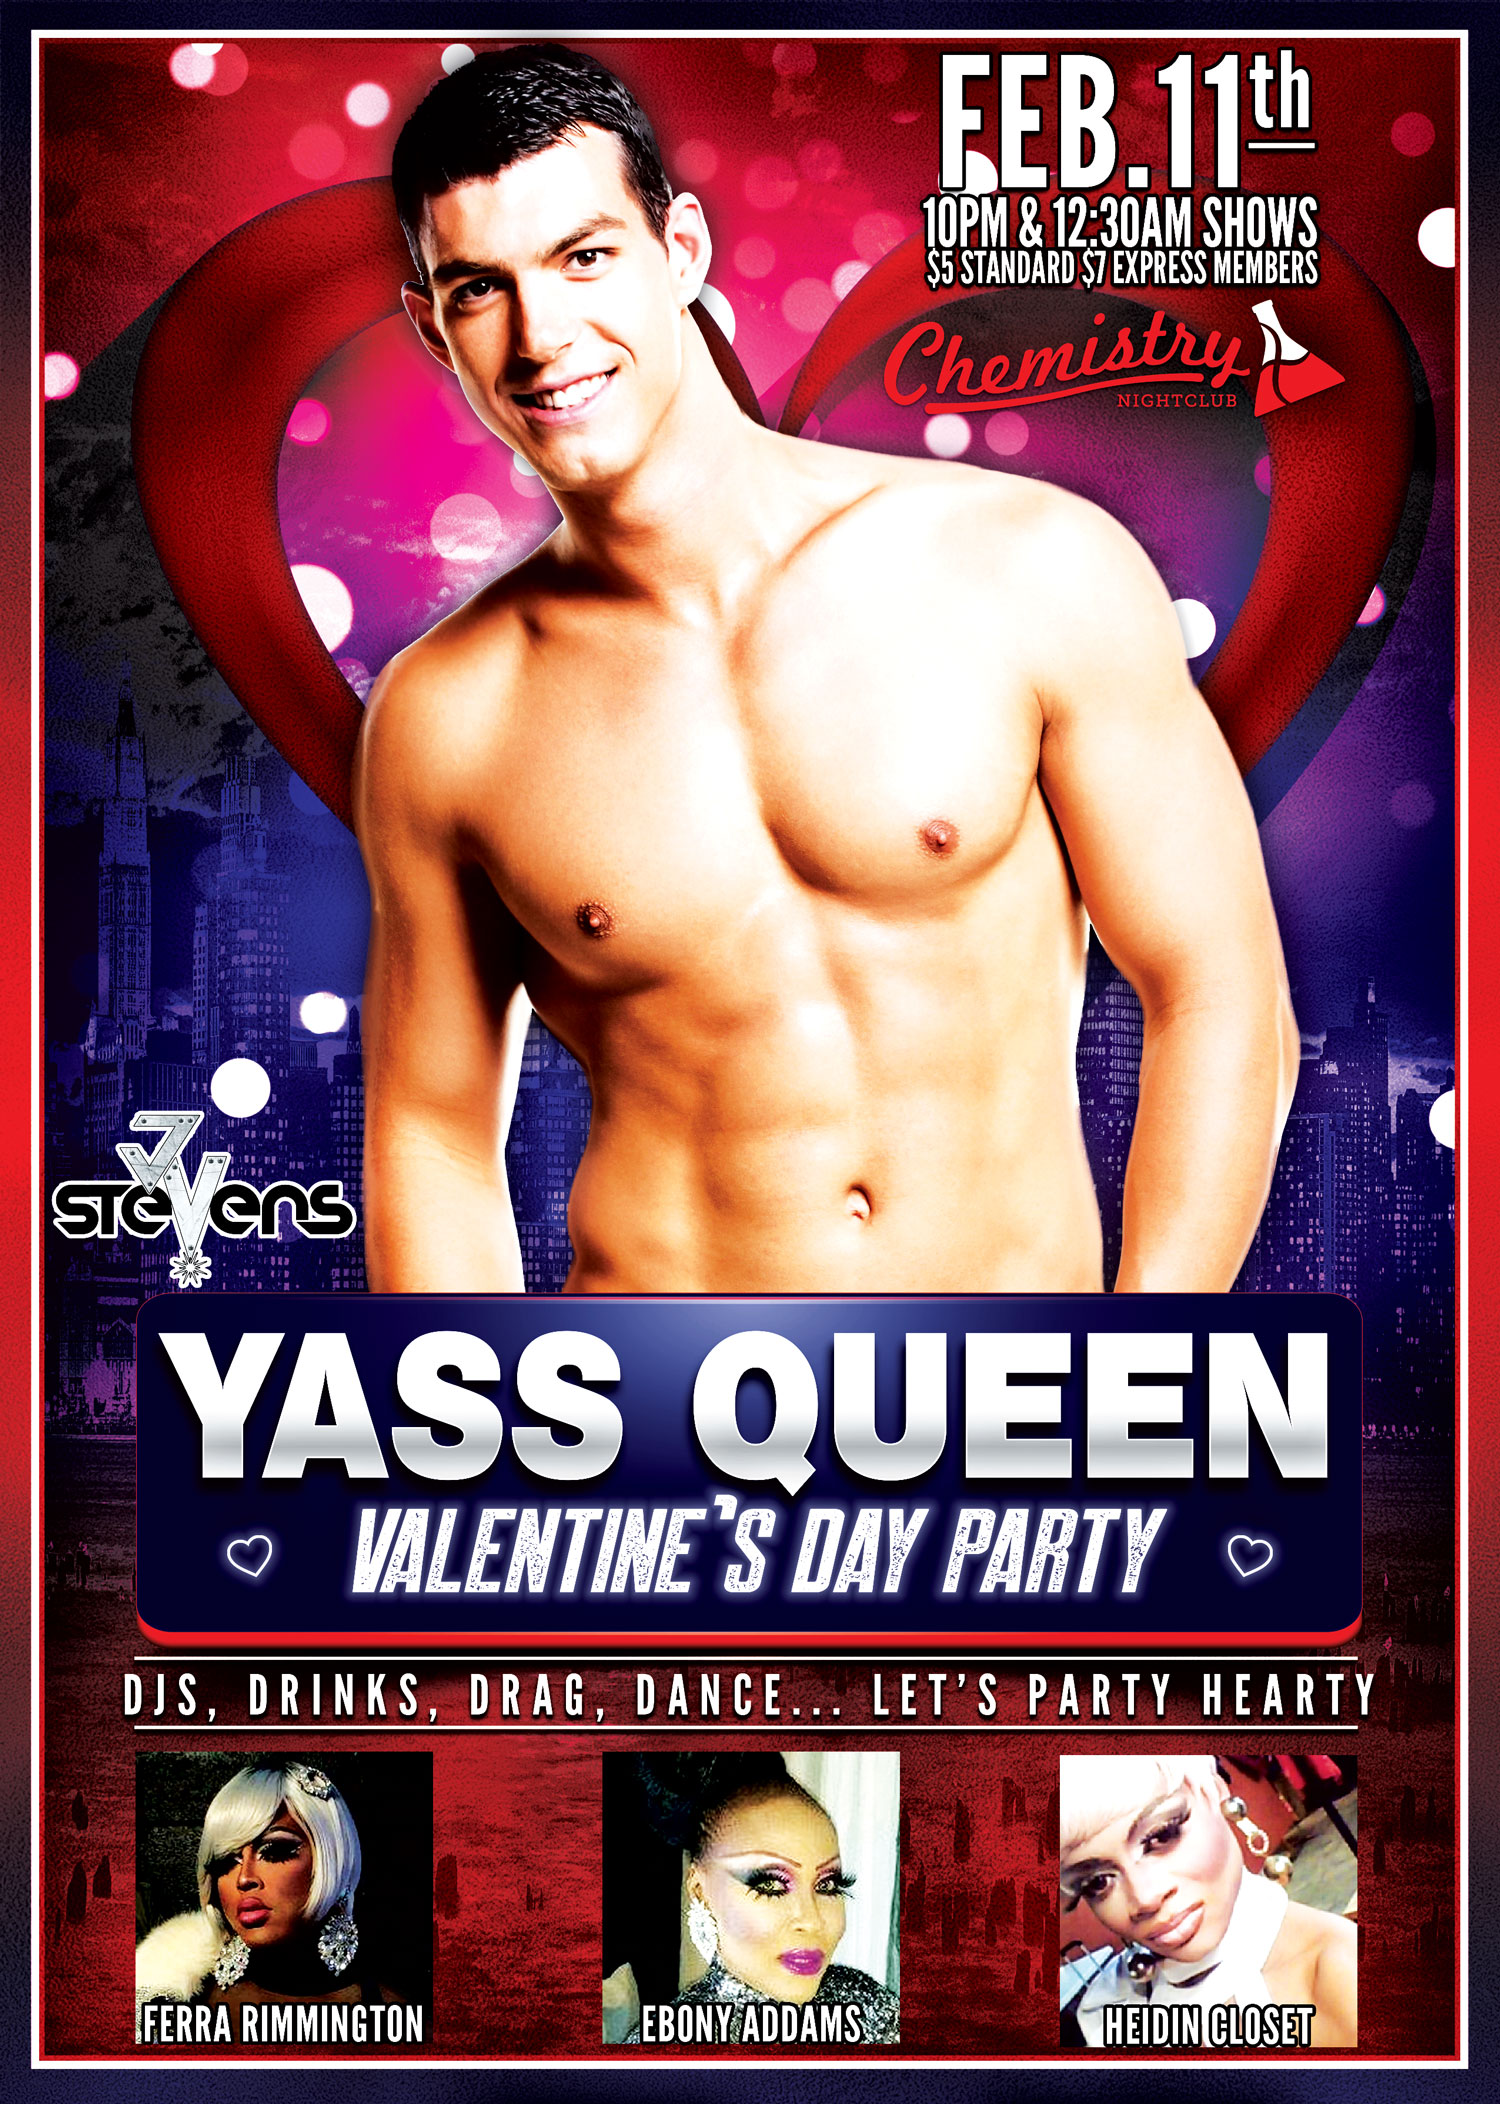 Valentines-Day-Party-Feb-11